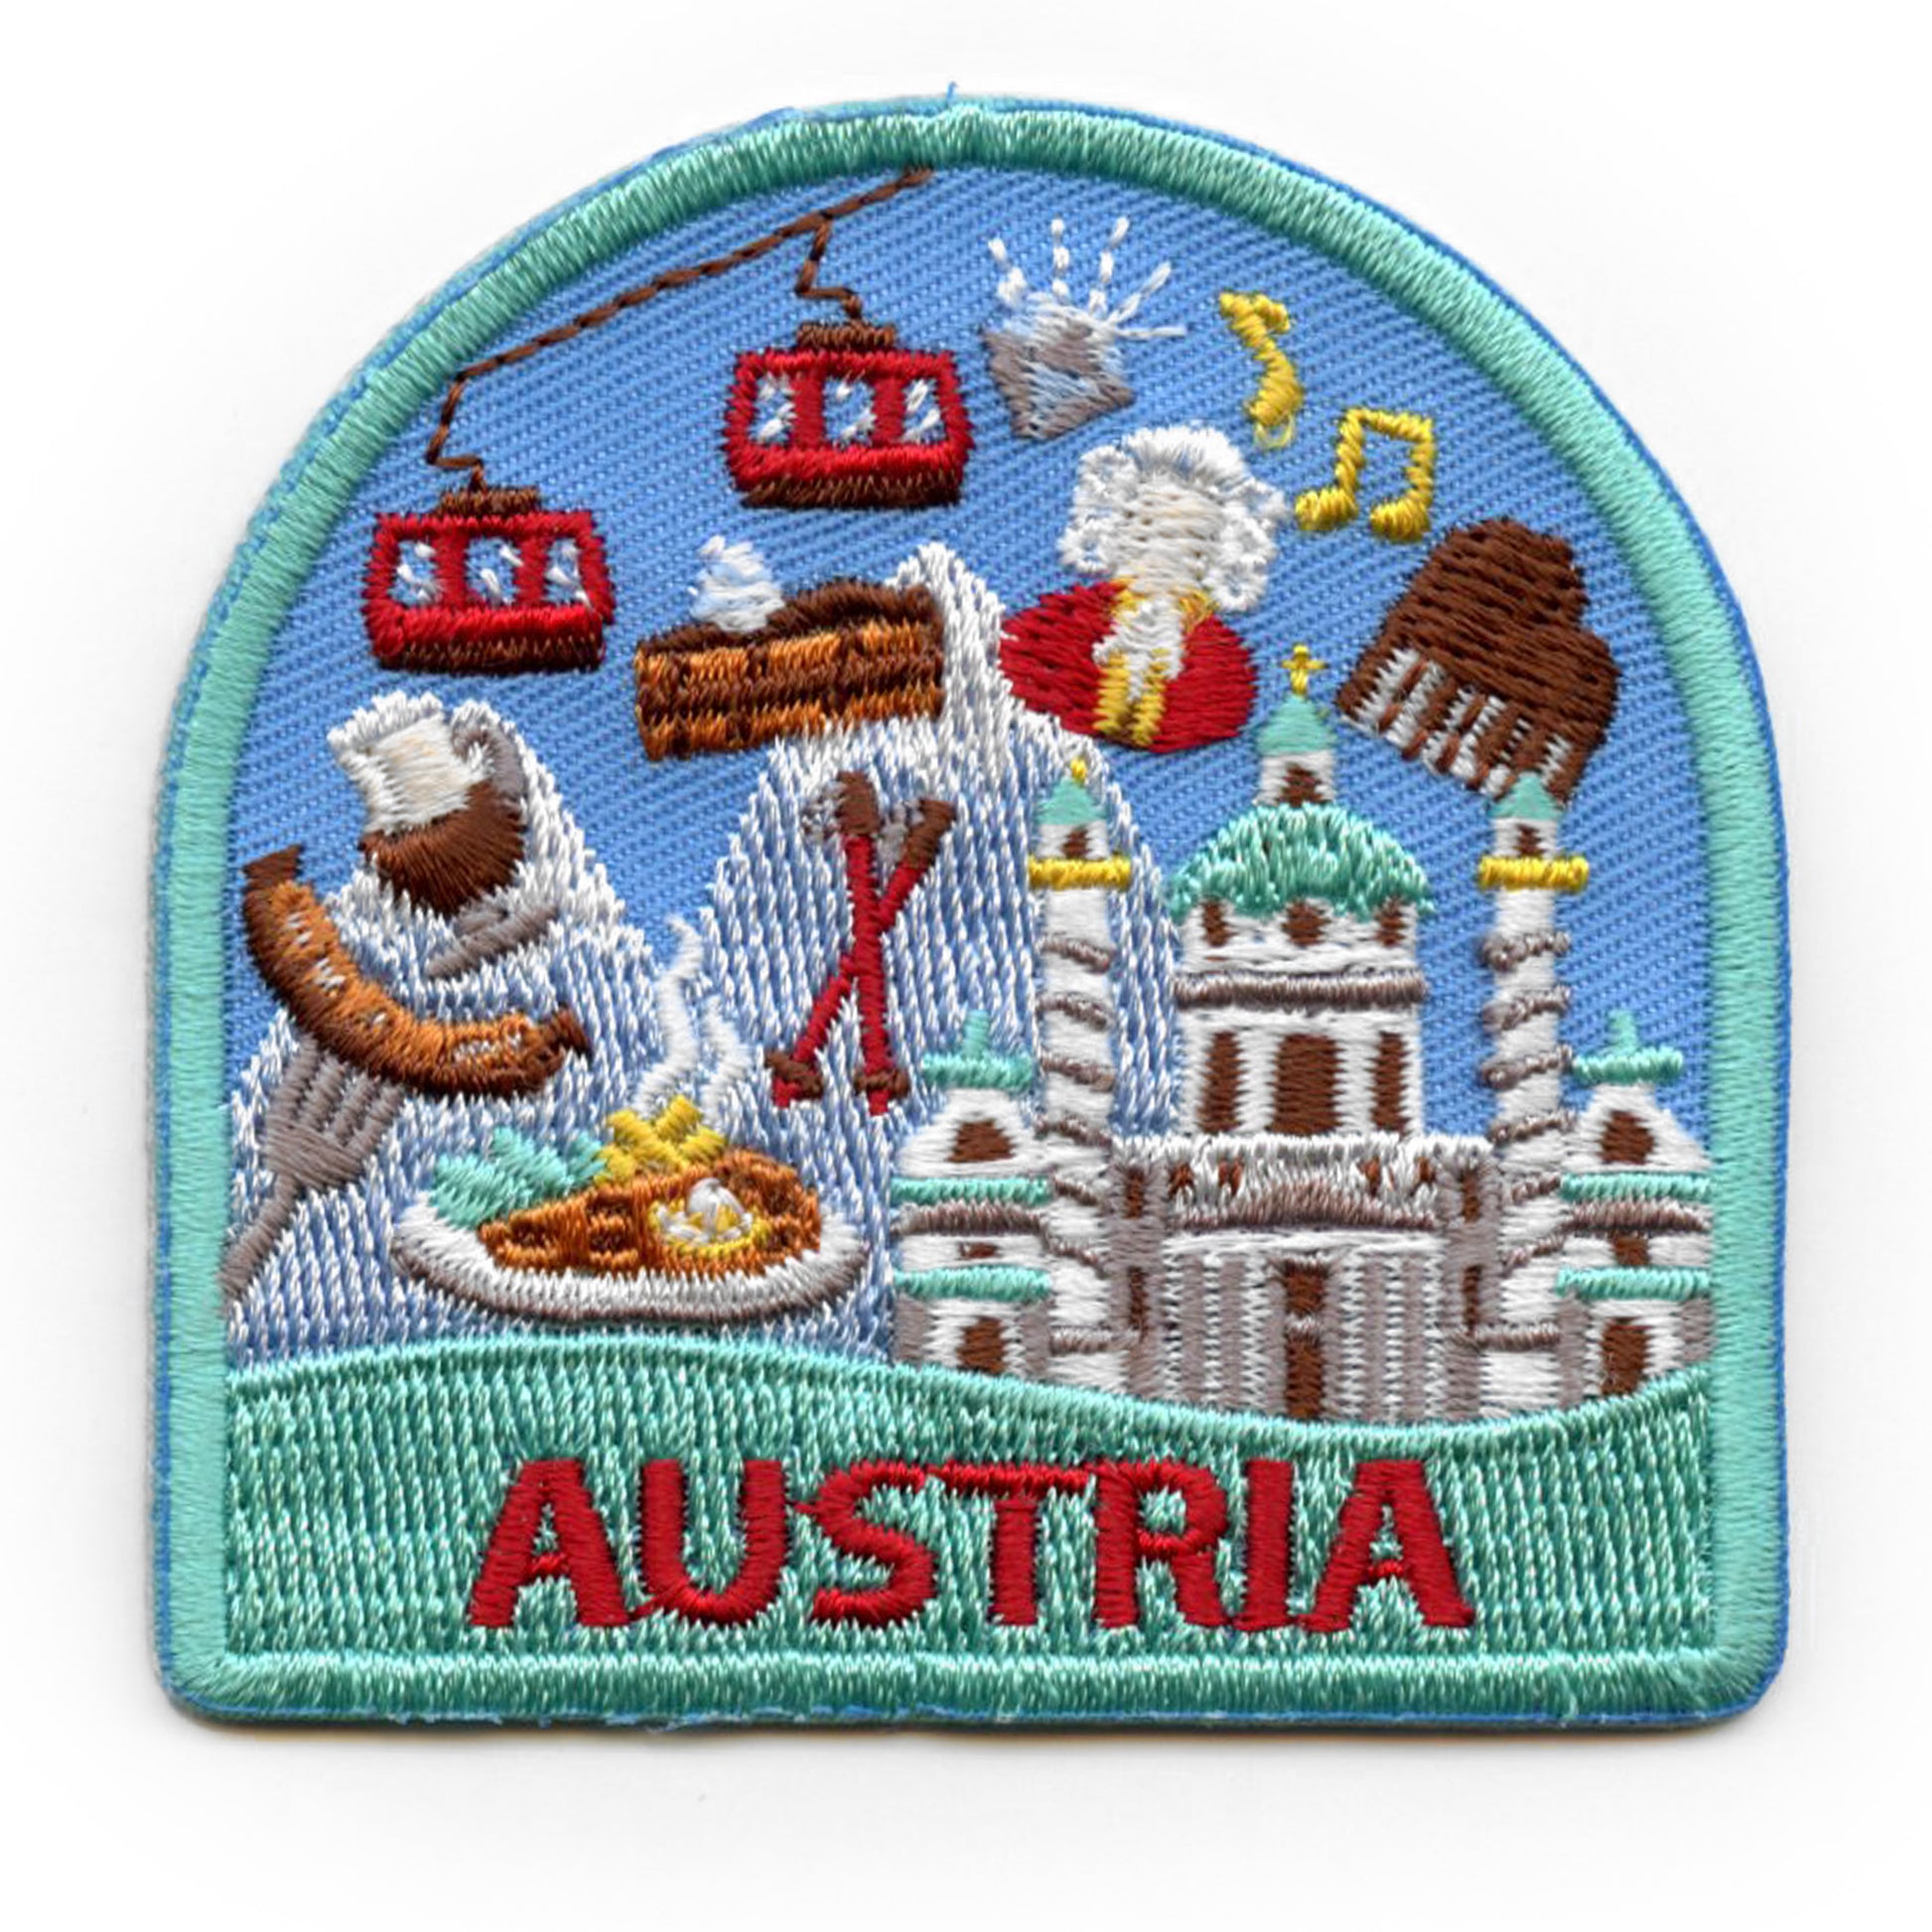 Germany Travel Patch Europe Badge Embroidered Iron on